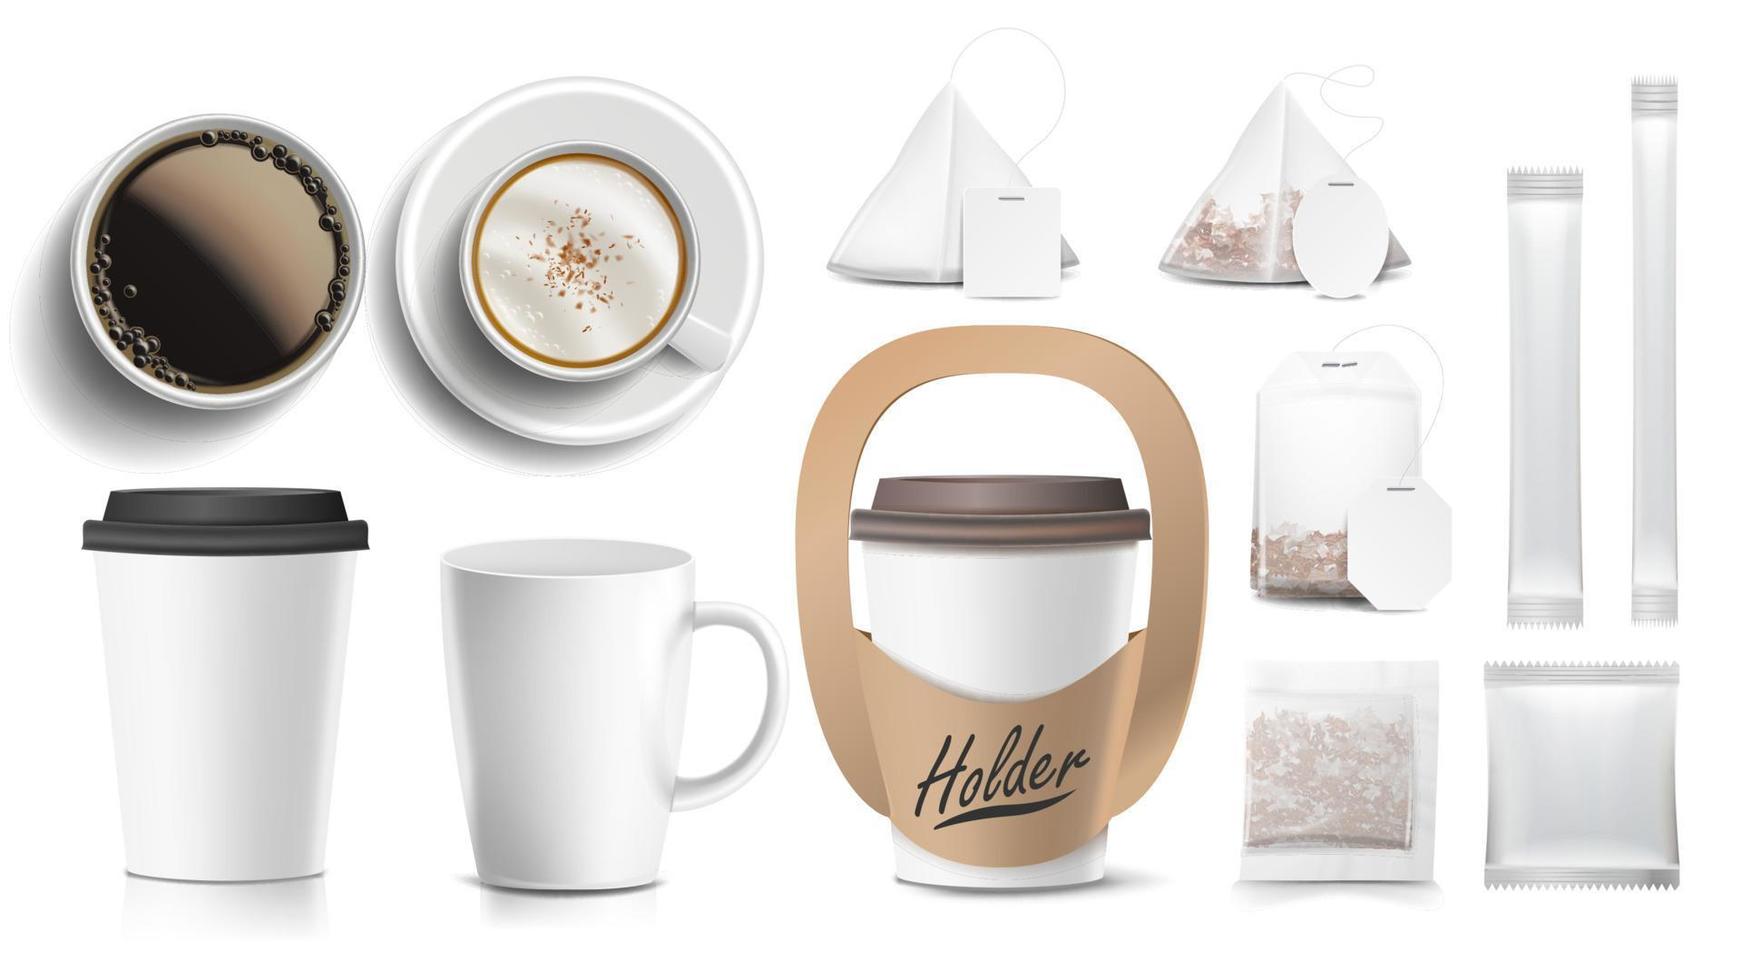 Coffee Packaging Design Vector. Cups Mock Up. White Coffee Mug. Ceramic And Paper, Plastic Cup. Top, Side View. Holder For Carrying One Cup. Blank Foil Packaging Sugar. Realistic Isolated Illustration vector